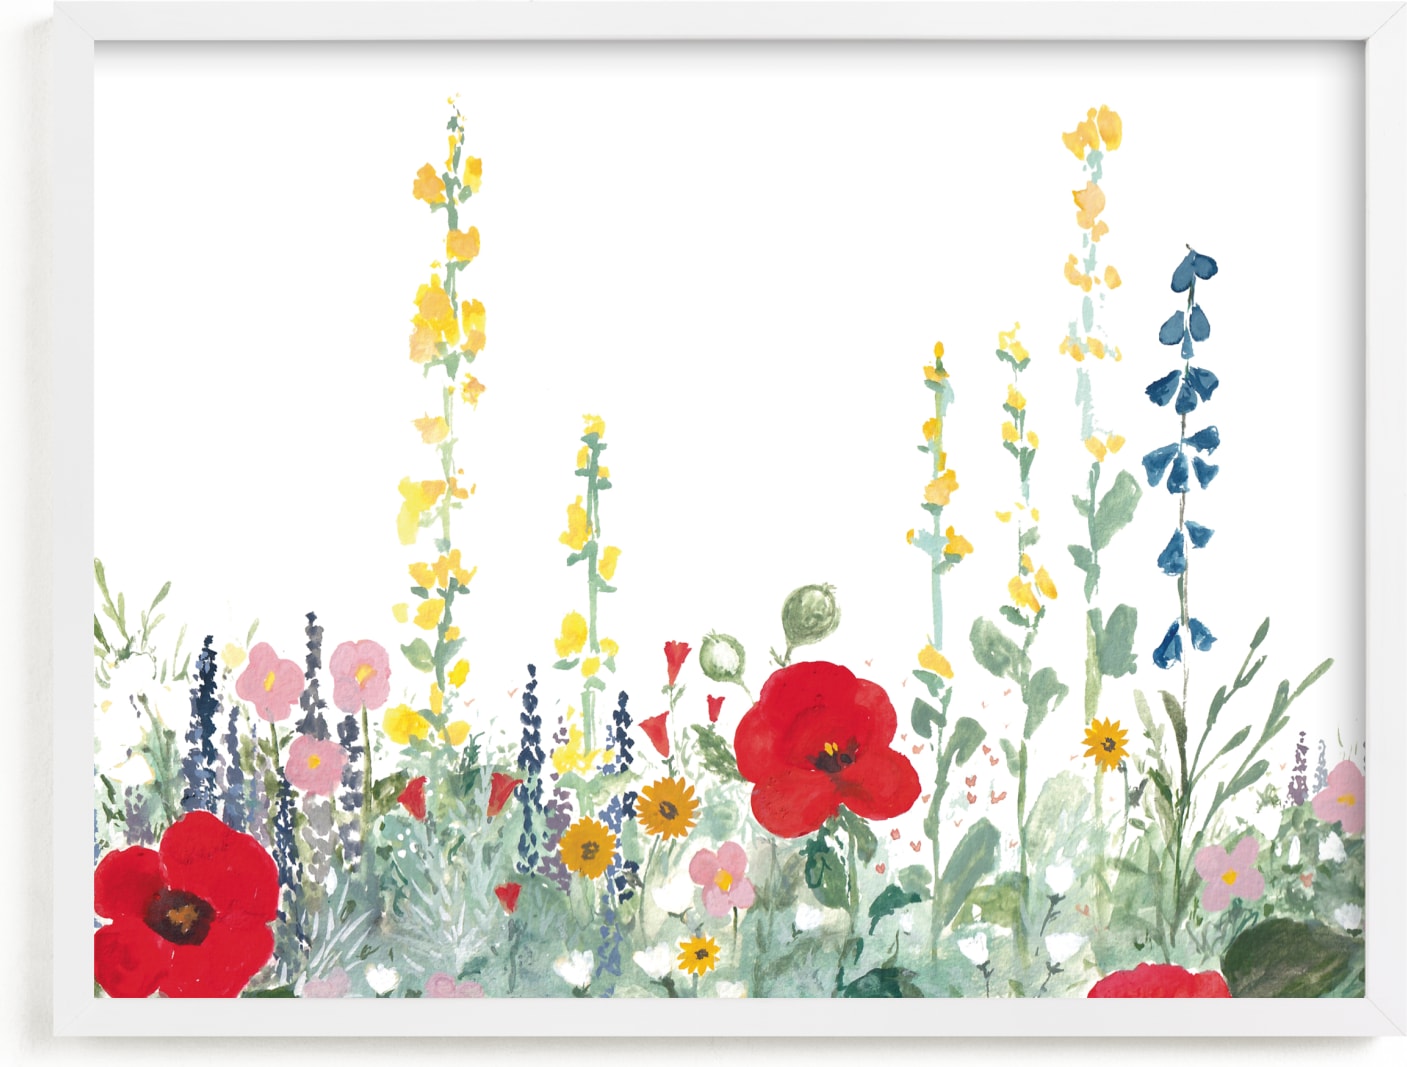 This is a colorful kids wall art by Anna Stout-Tuckwiller called English Garden.